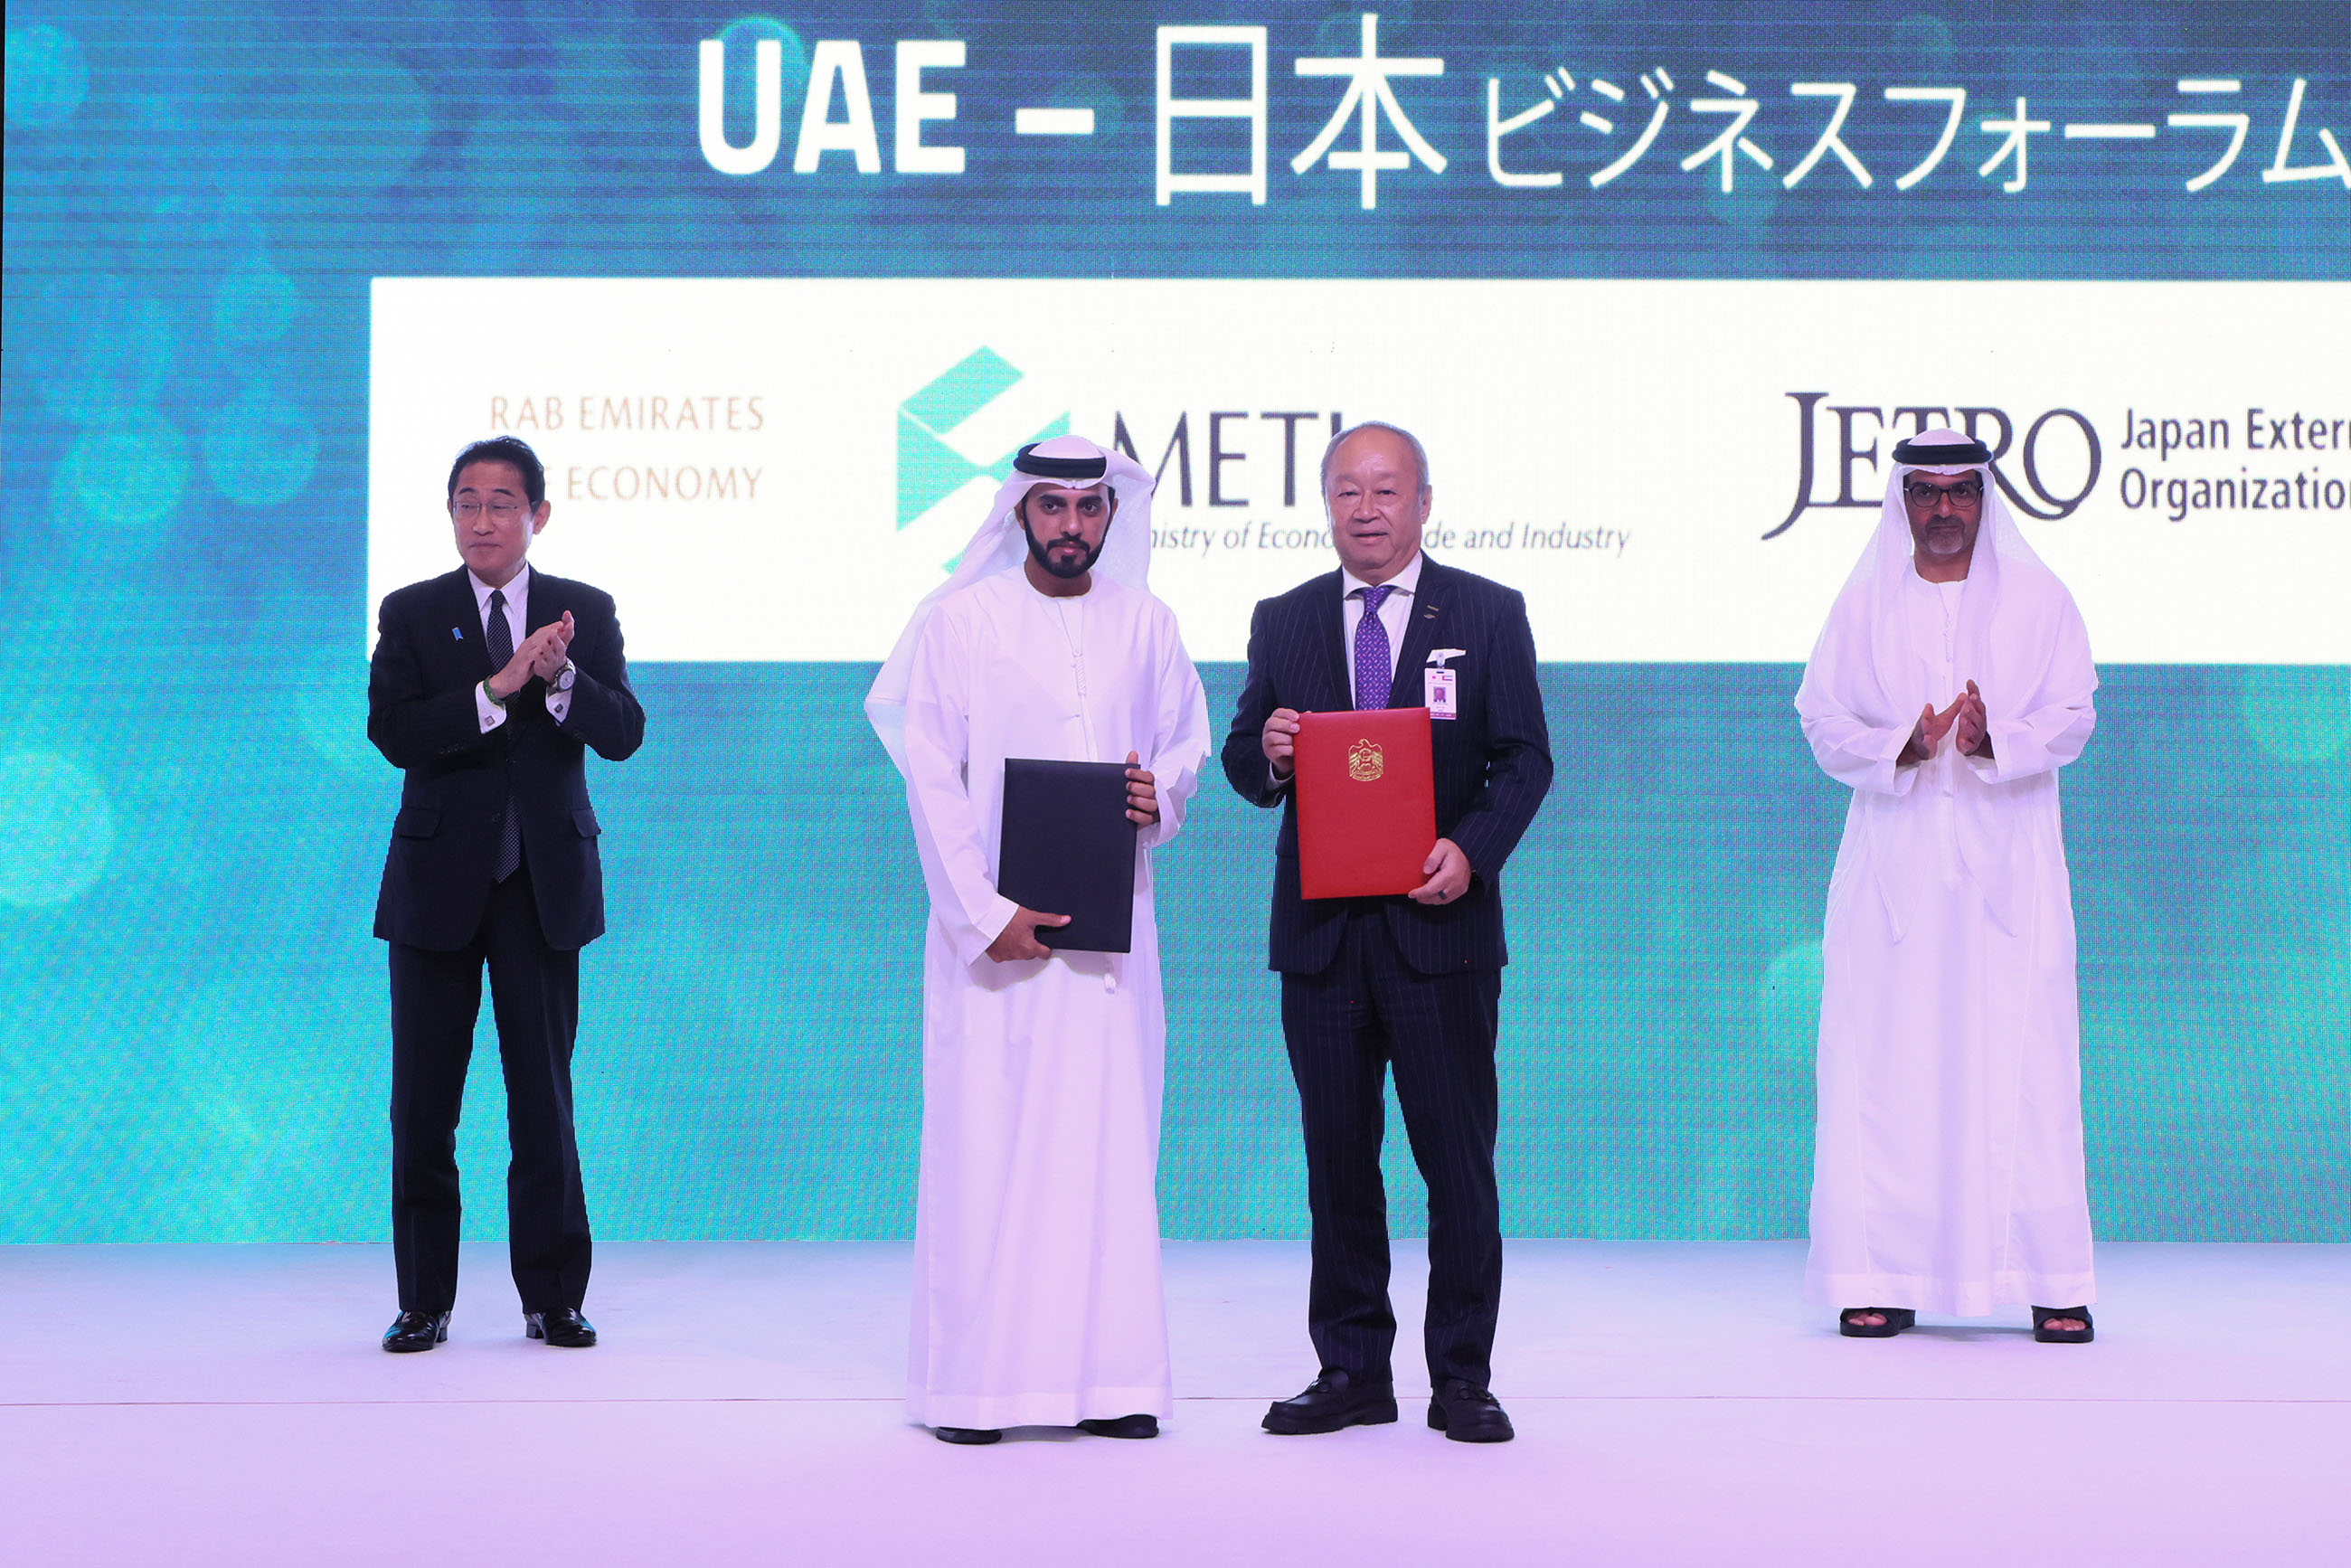 Ceremony to exchange documents at the Japan-UAE Business Forum (20)